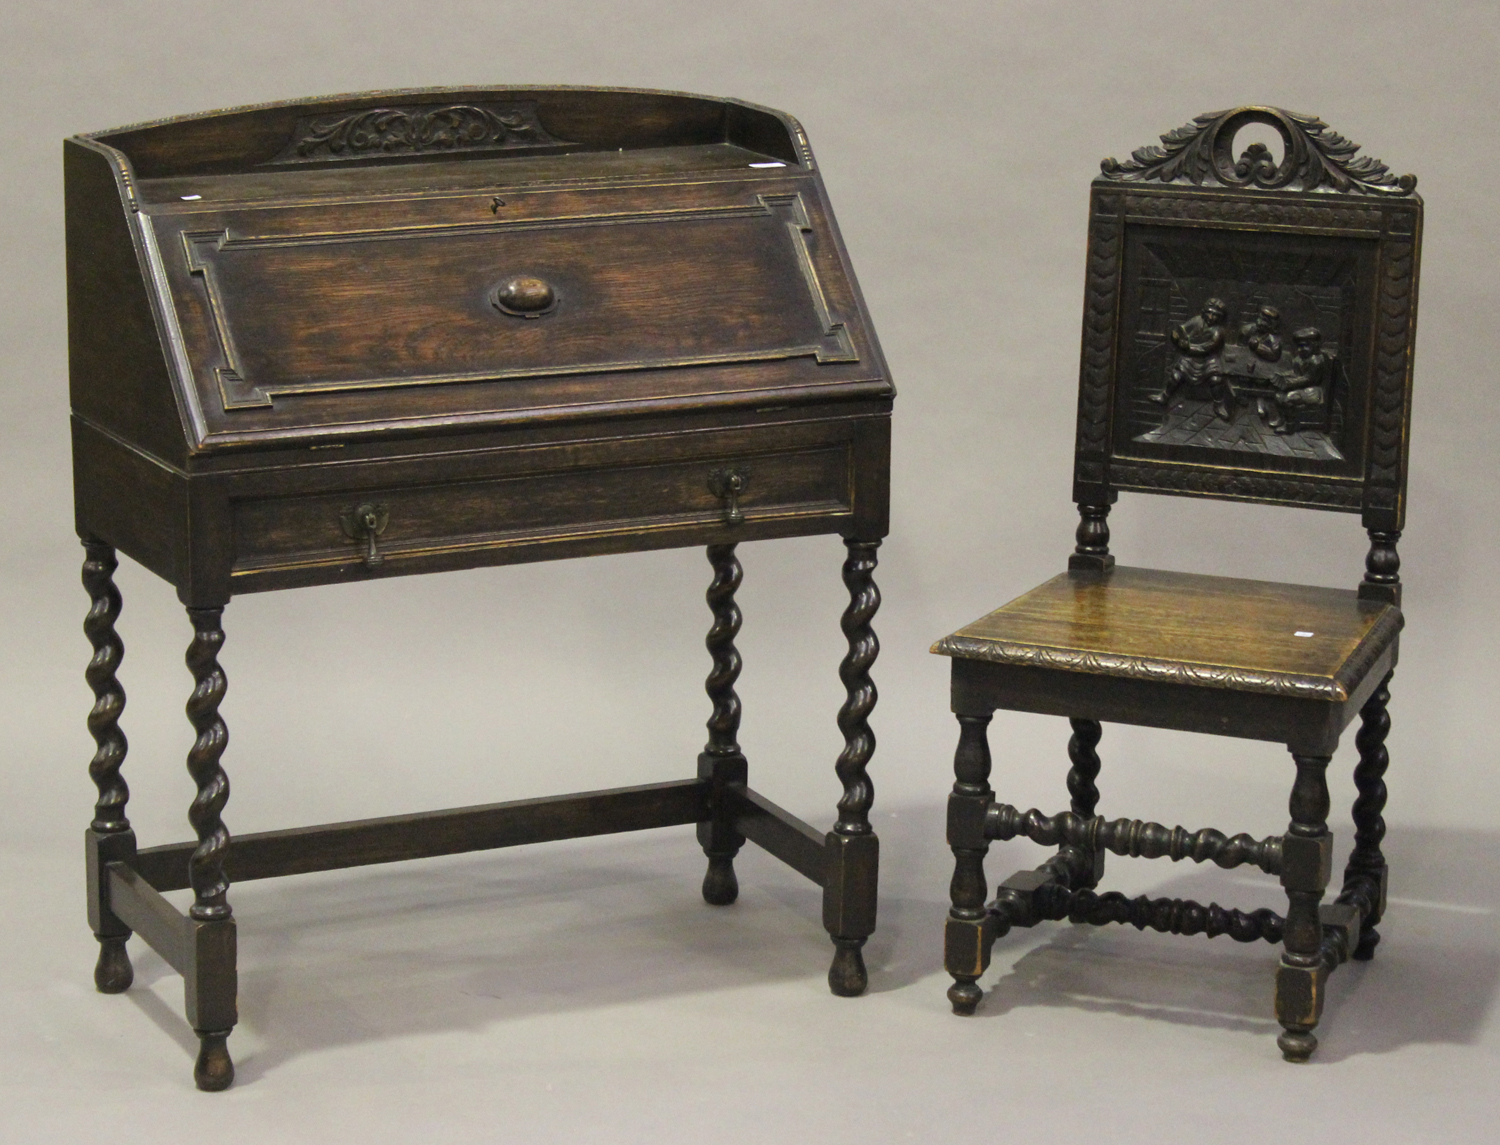 A George V oak bureau with carved decoration and applied mouldings, the fall front above a drawer,